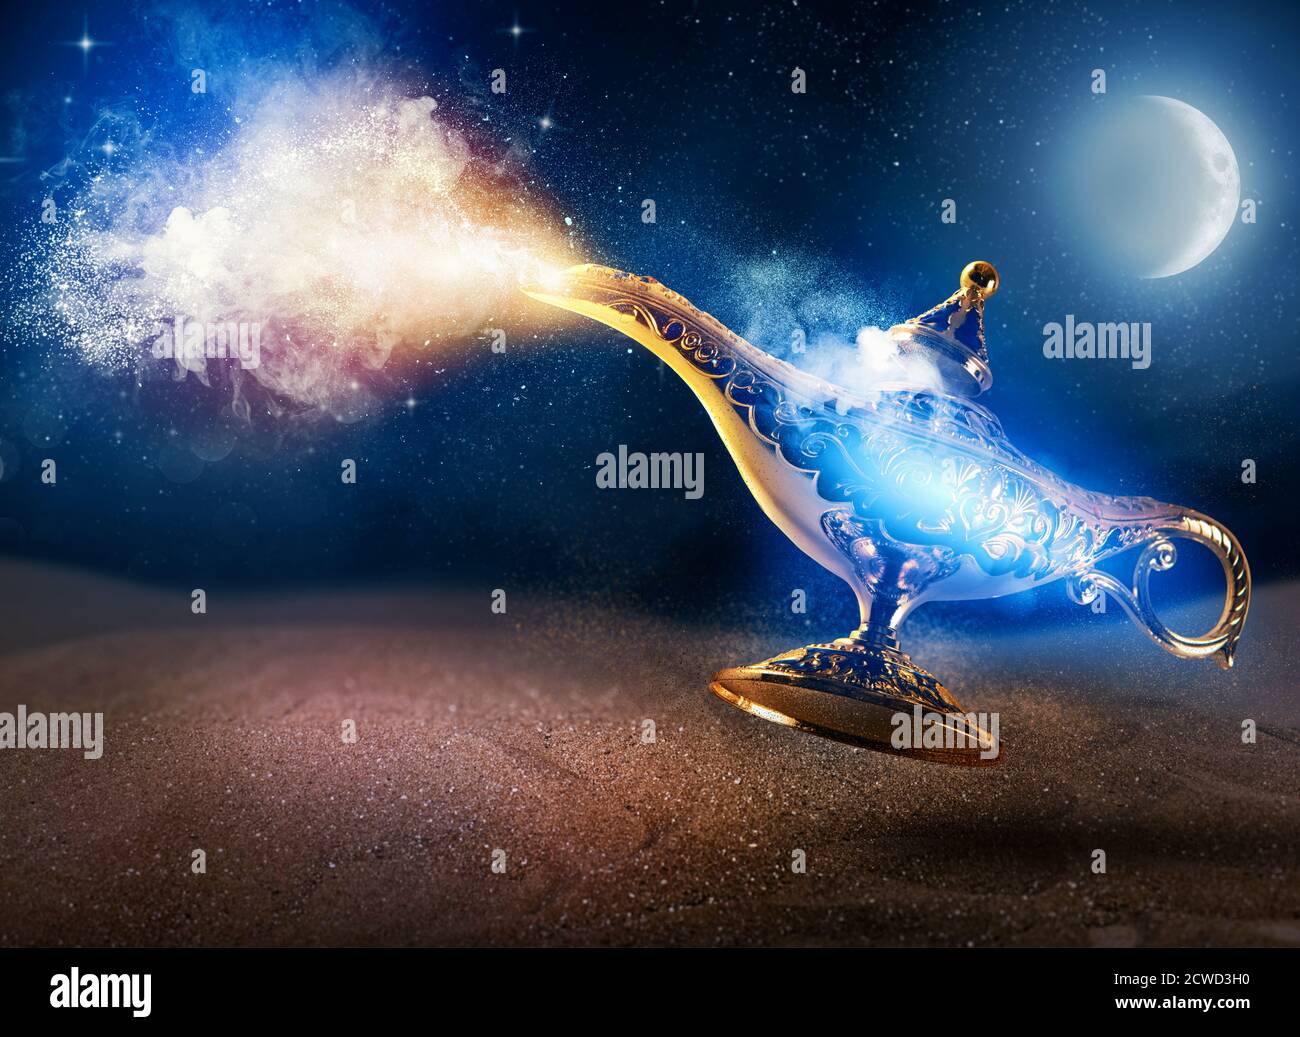 Smoke exists from magic aladdin genie lamp in a desert Stock Photo